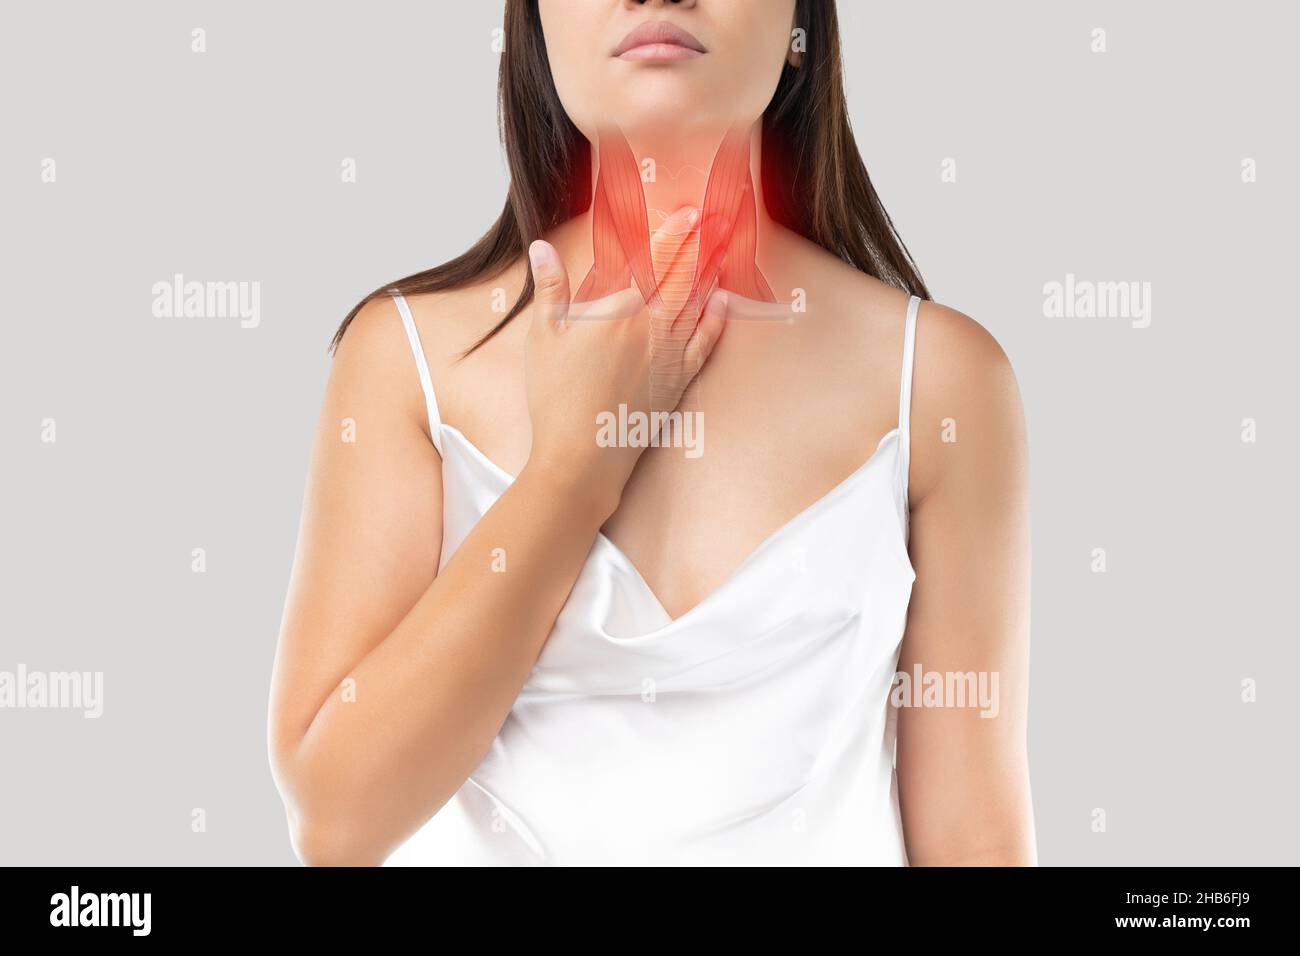 Bronchitis symptoms. Illustration of bronchial or windpipe on a woman's body, Concept with healthcare and medicine. Women suffer from neck pain due to Stock Photo